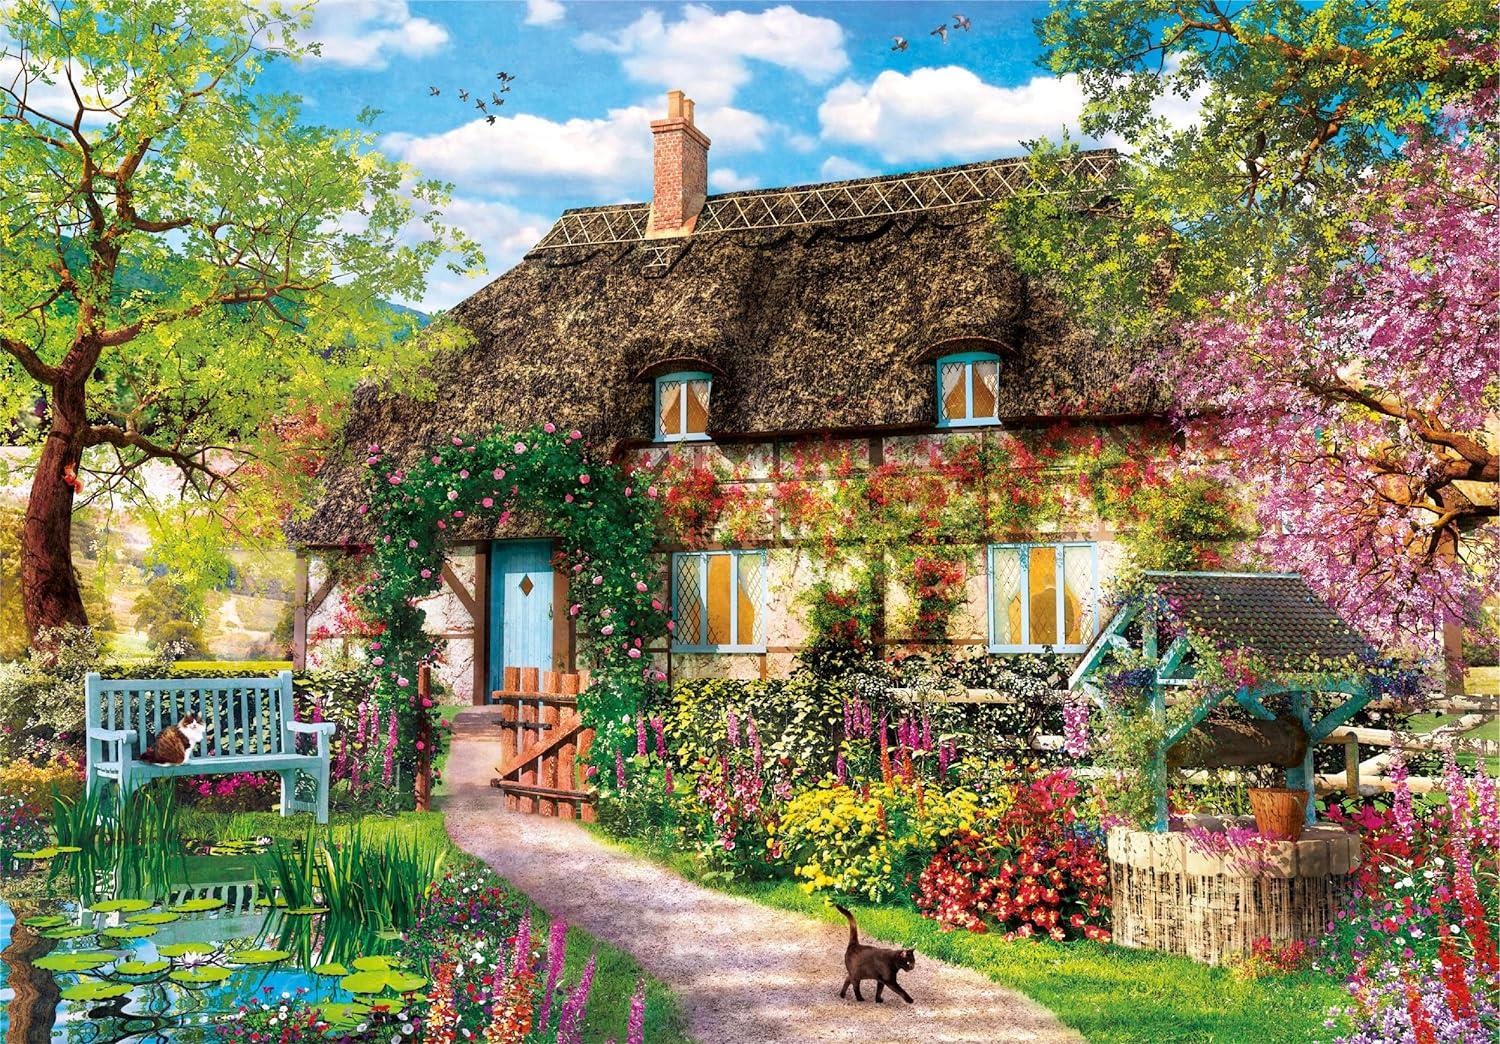 Clementoni The Old Cottage Jigsaw Puzzle (1000 Pieces)